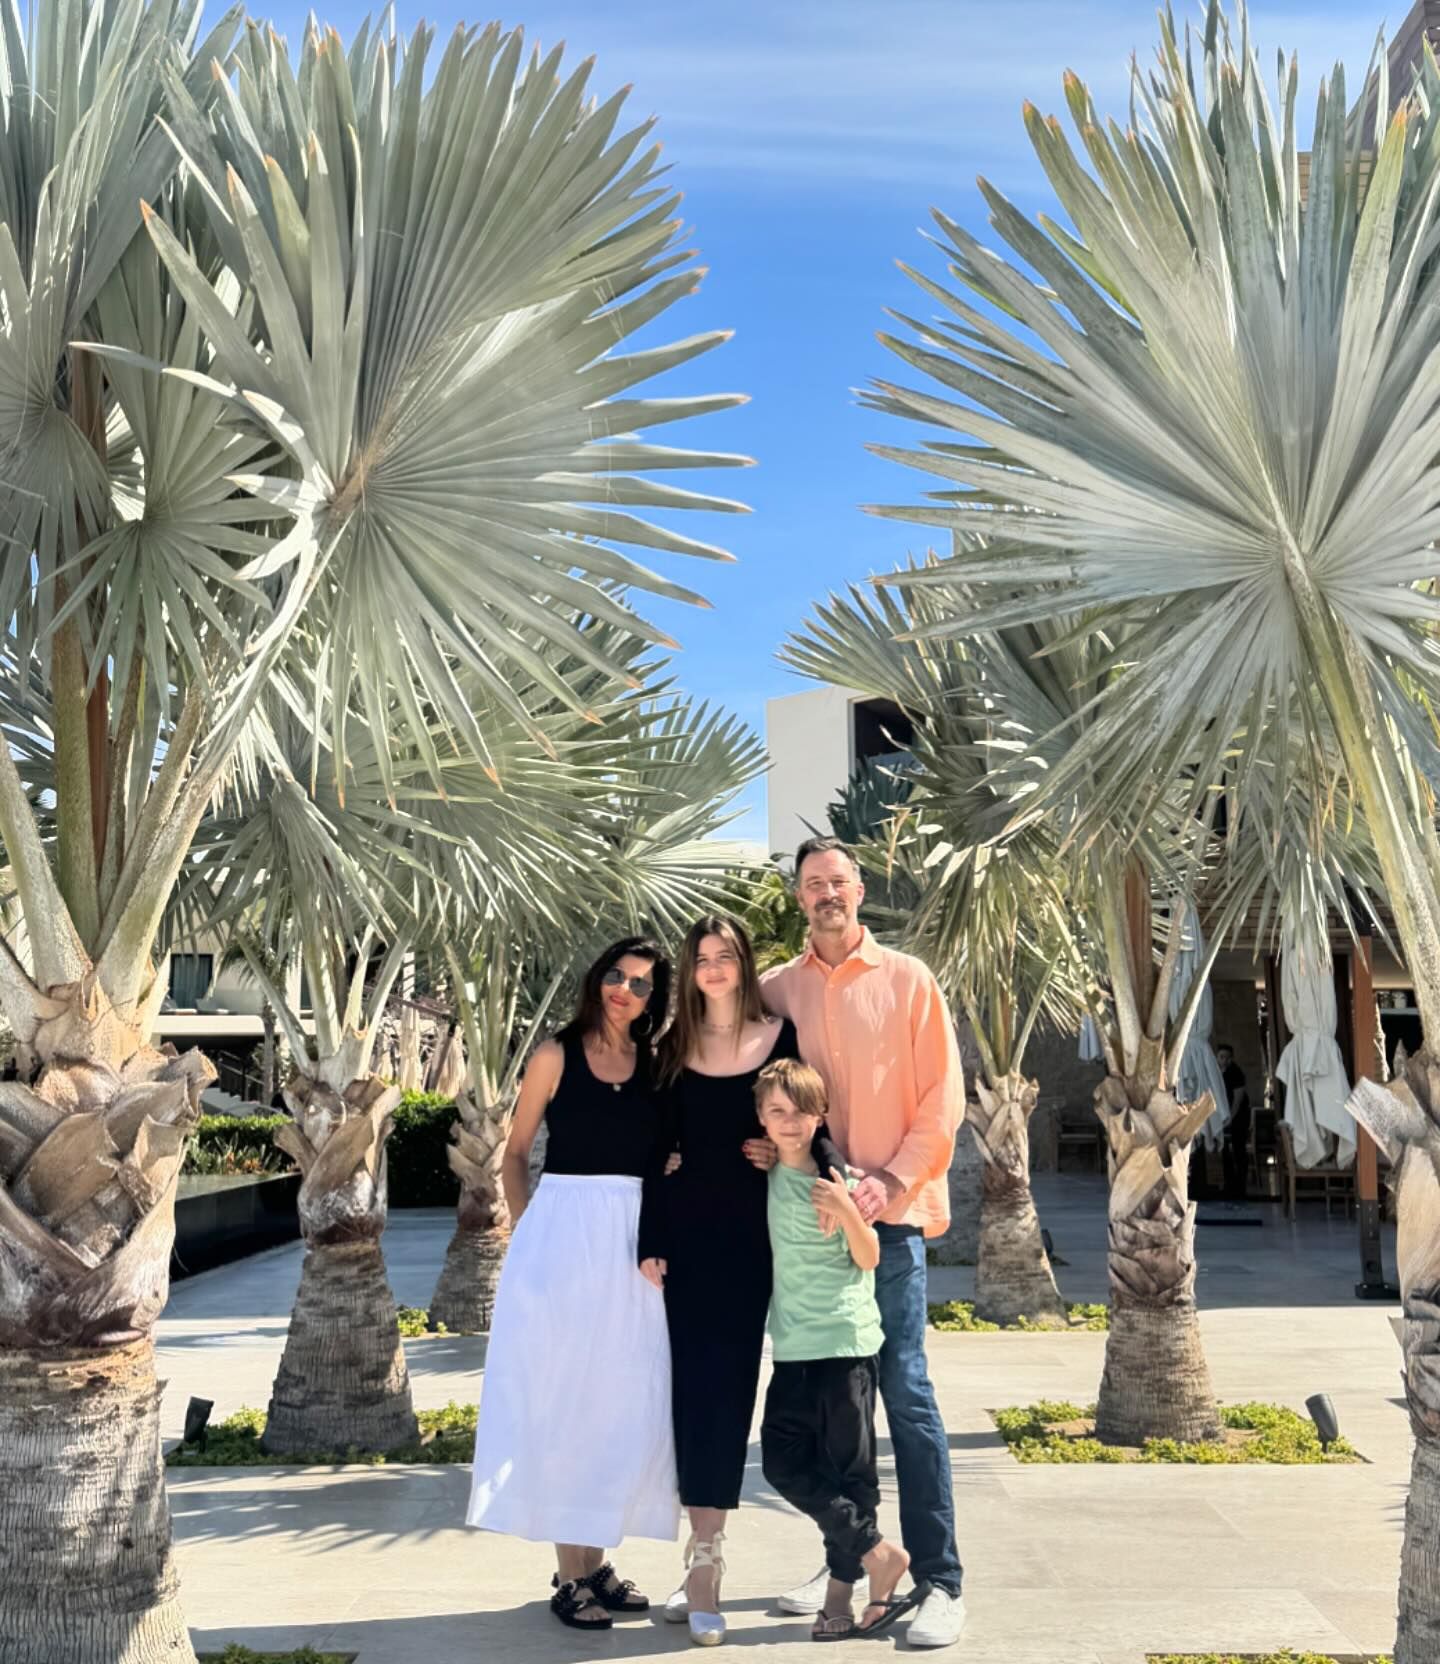 Tiffani ventured to Mexico with her husband and two kids for spring break